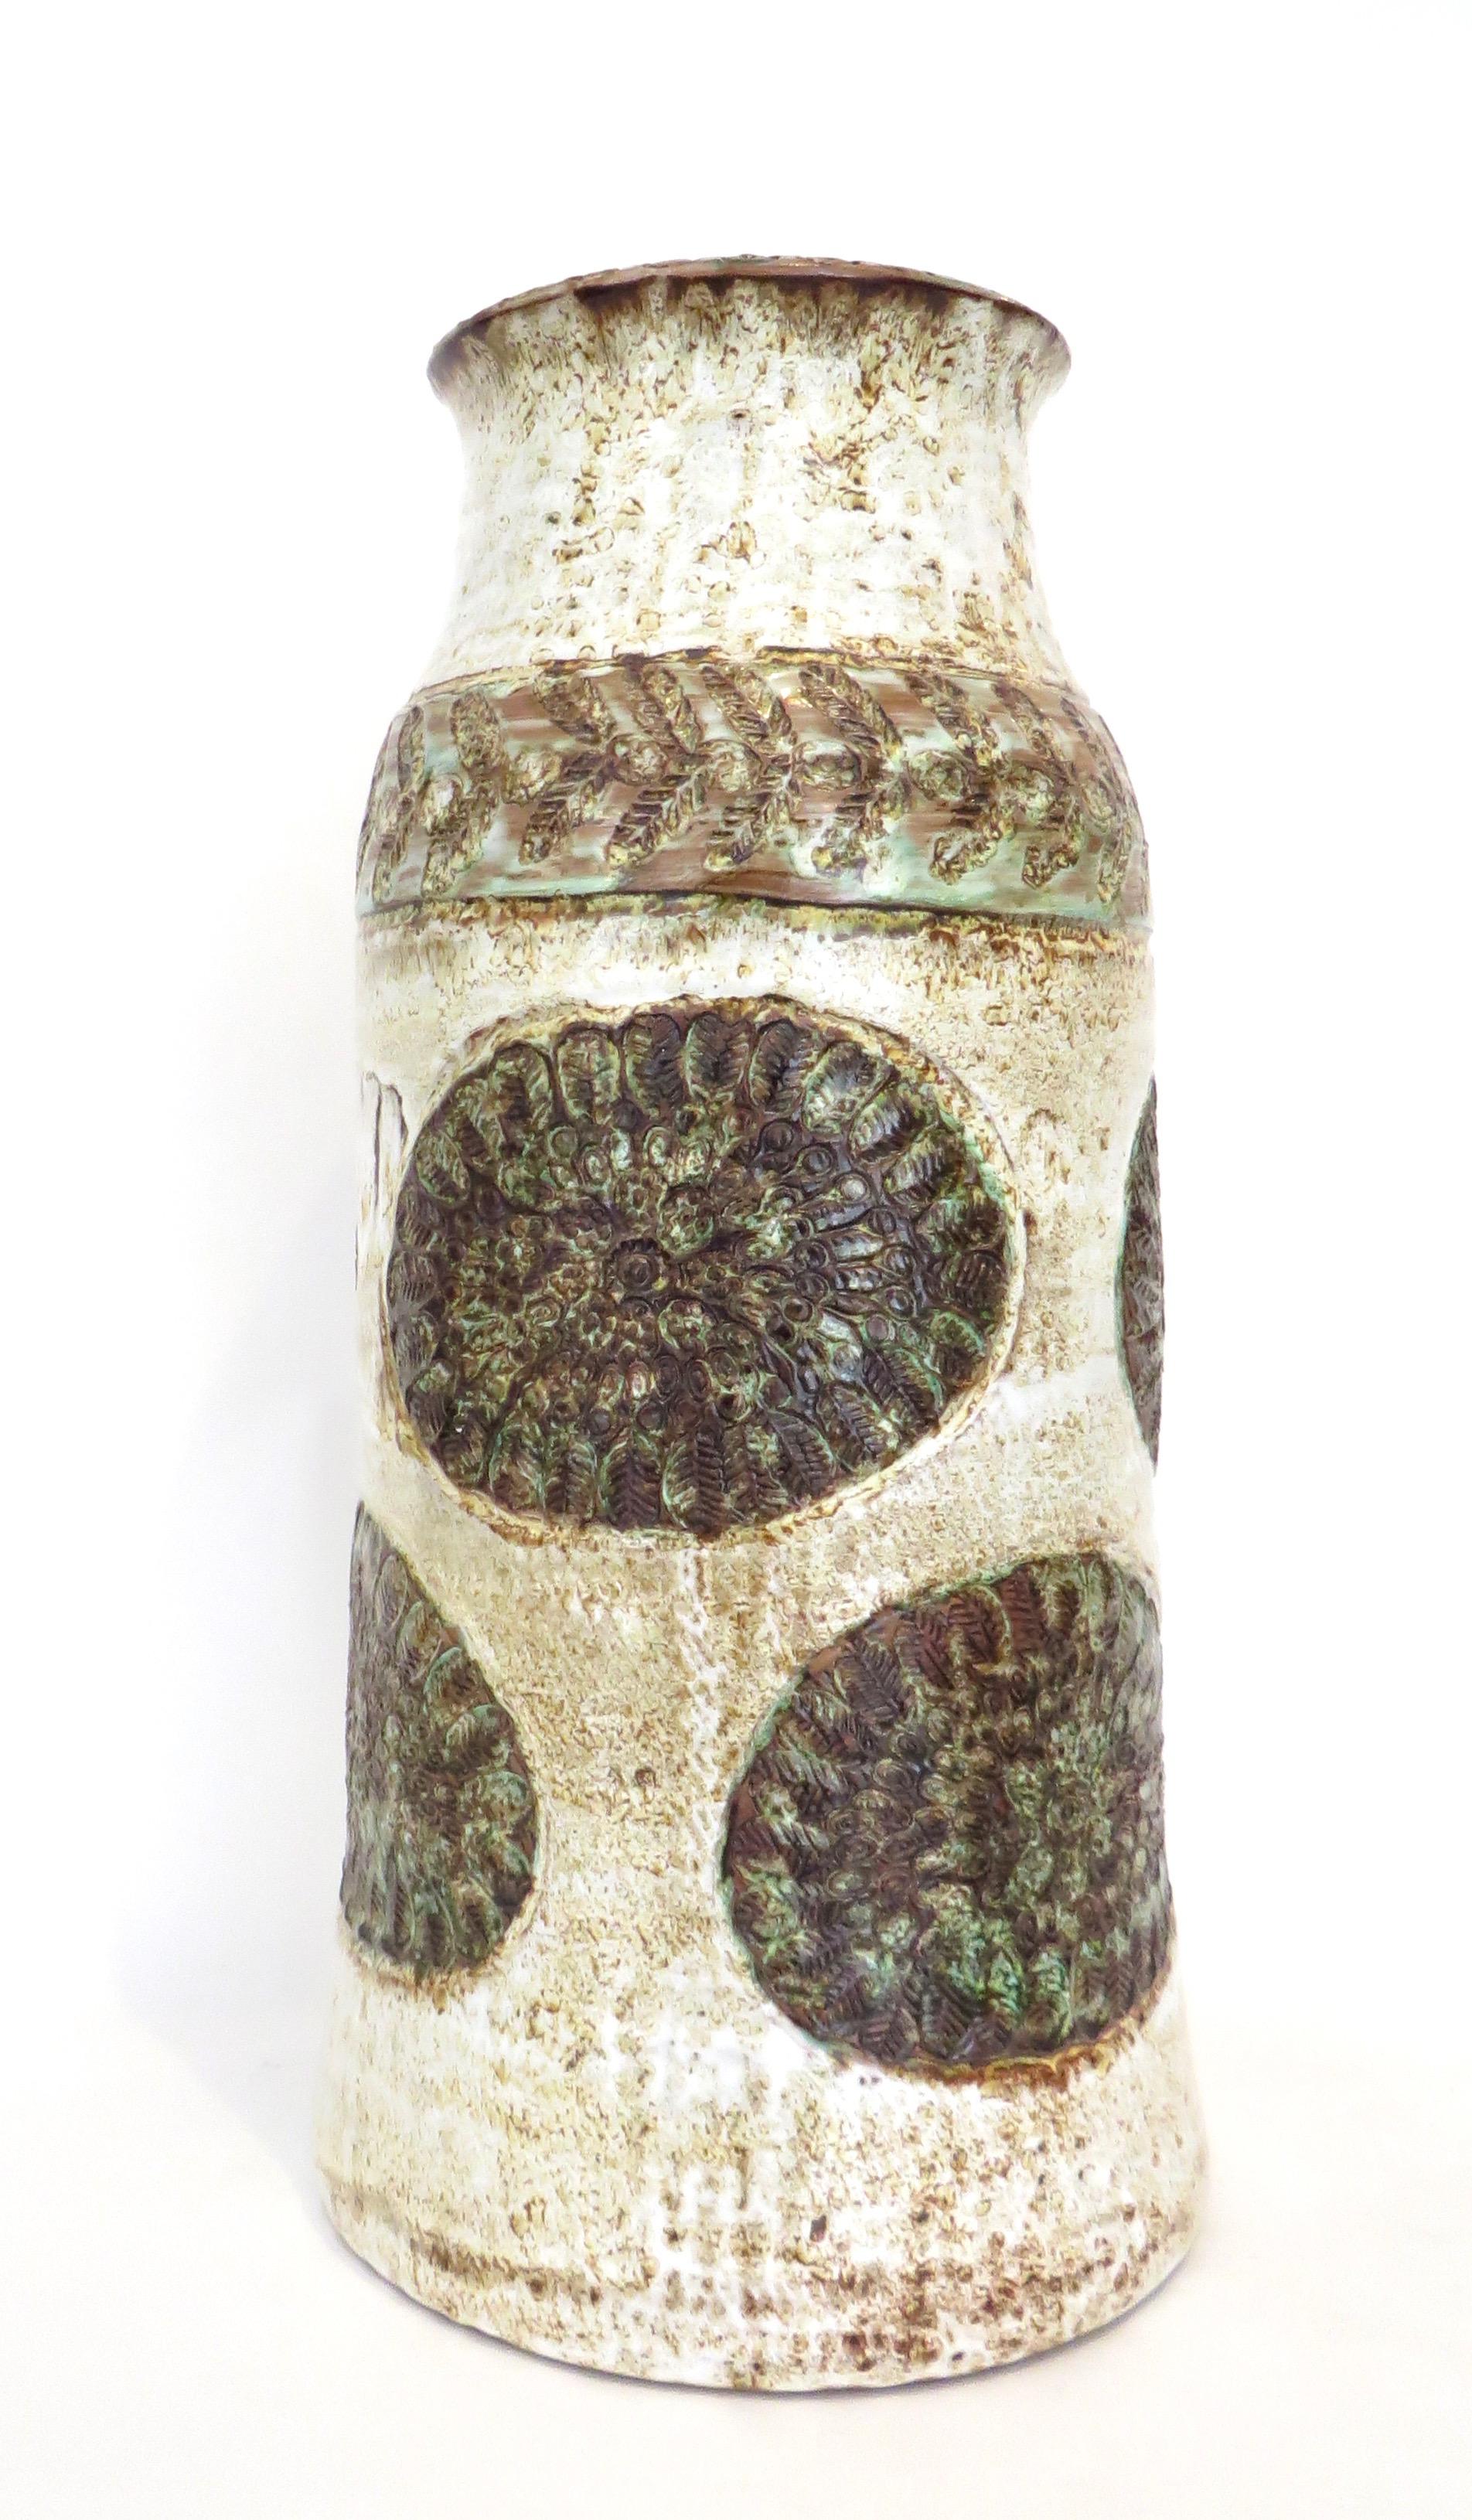 A tall ceramic vase from Vallauris France Signed Cardelle and Vallauris.
Carved, inised and colorfully decorated in creams, clue, green, brown on a cream background.
Excellent condition with no chips or cracks or restorations.